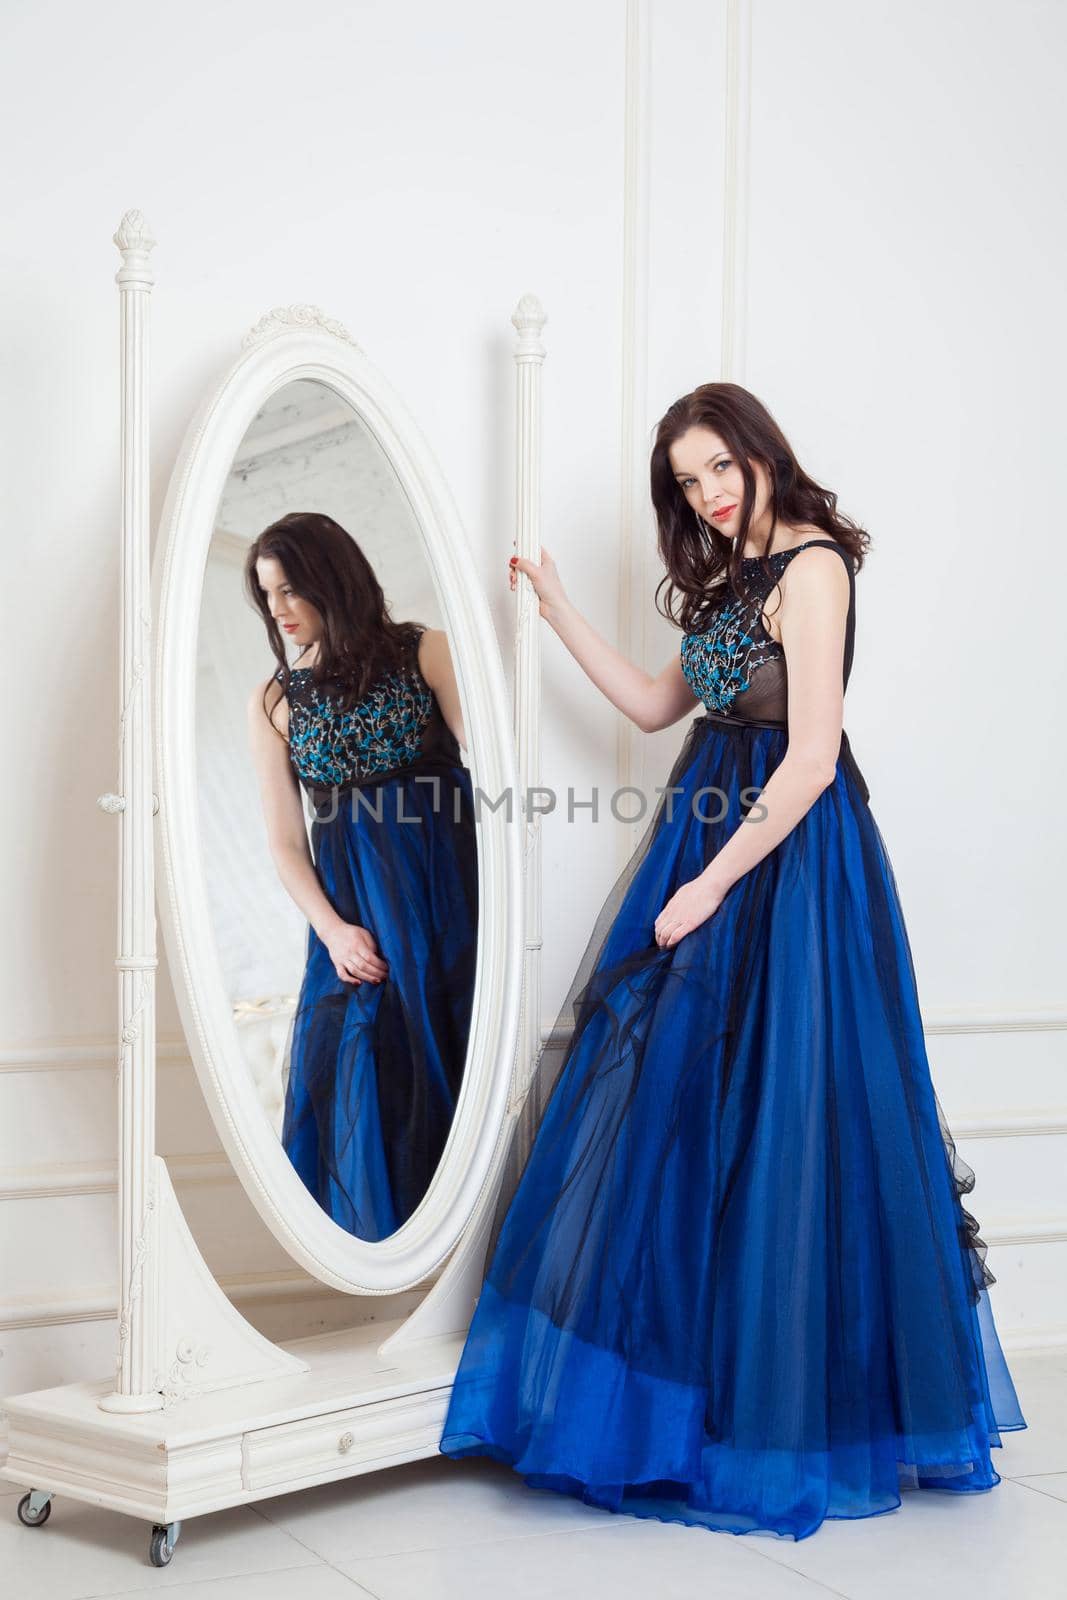 Fashion model with dress standing and posing near big mirror by Khosro1